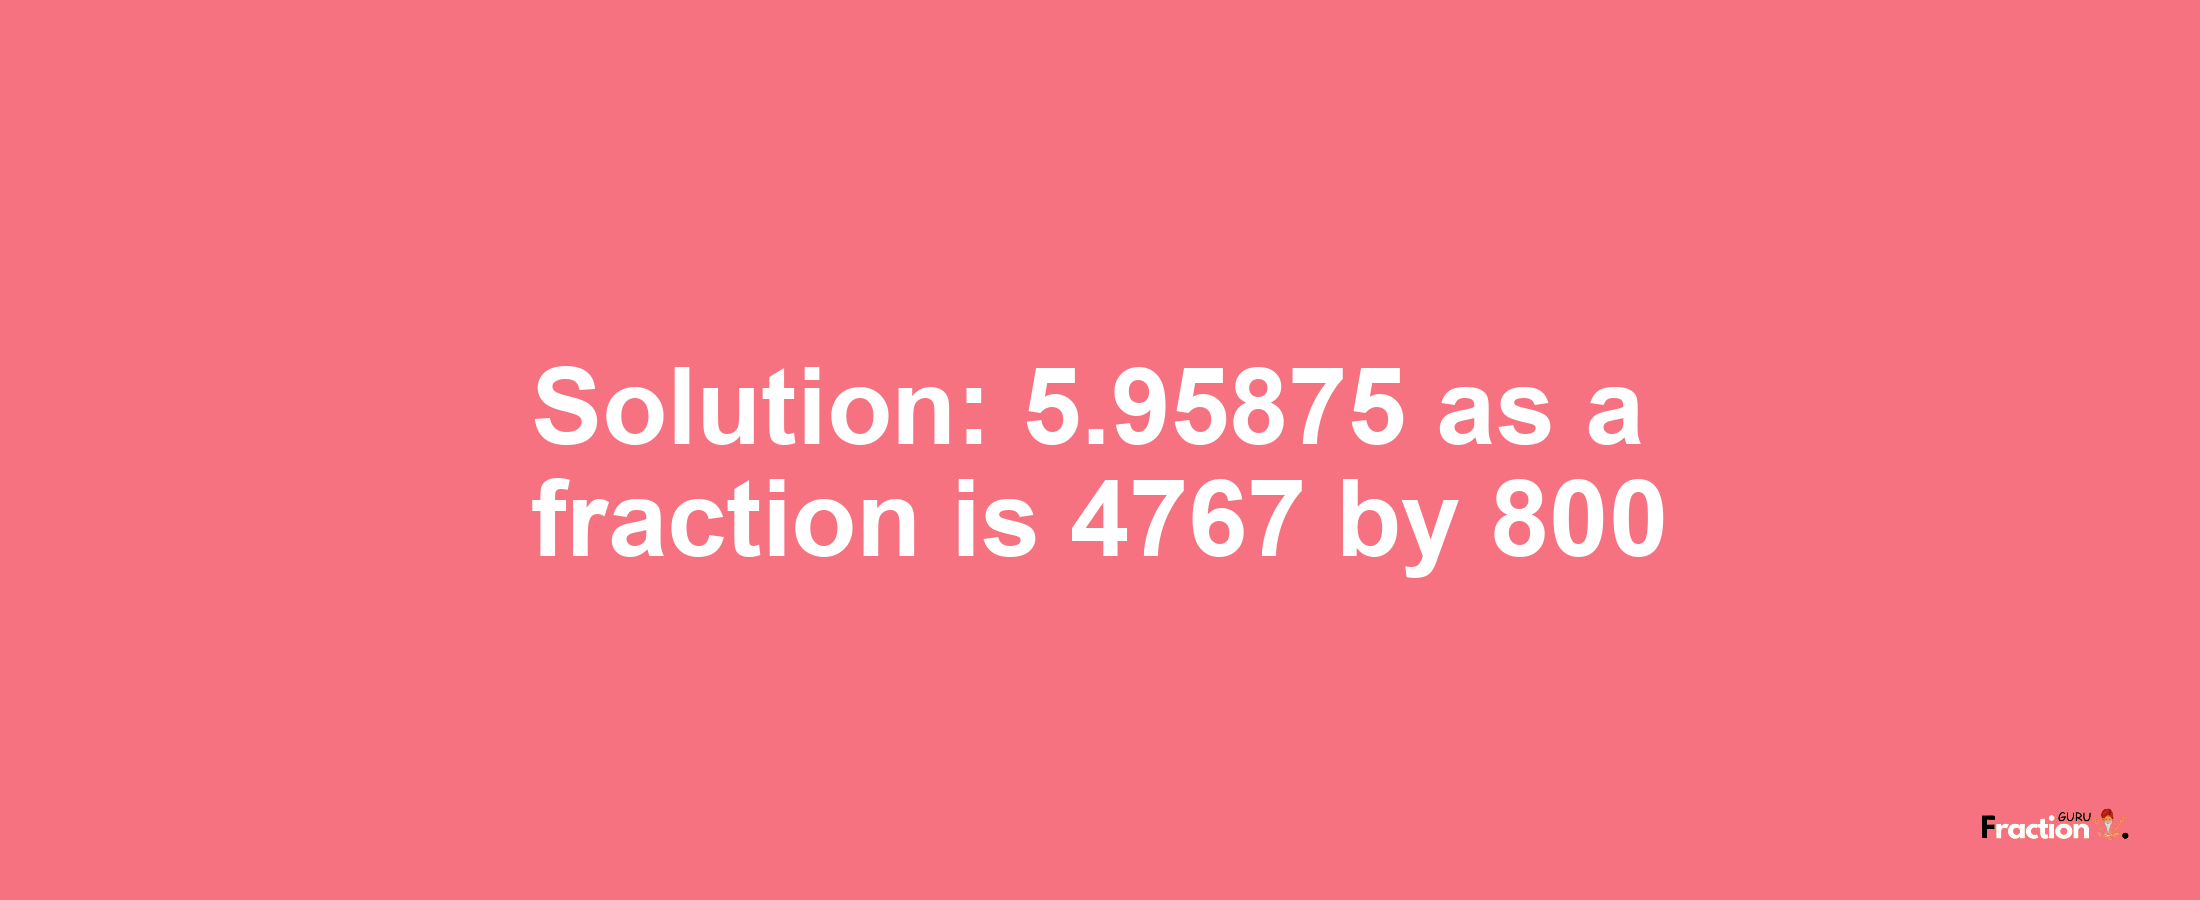 Solution:5.95875 as a fraction is 4767/800